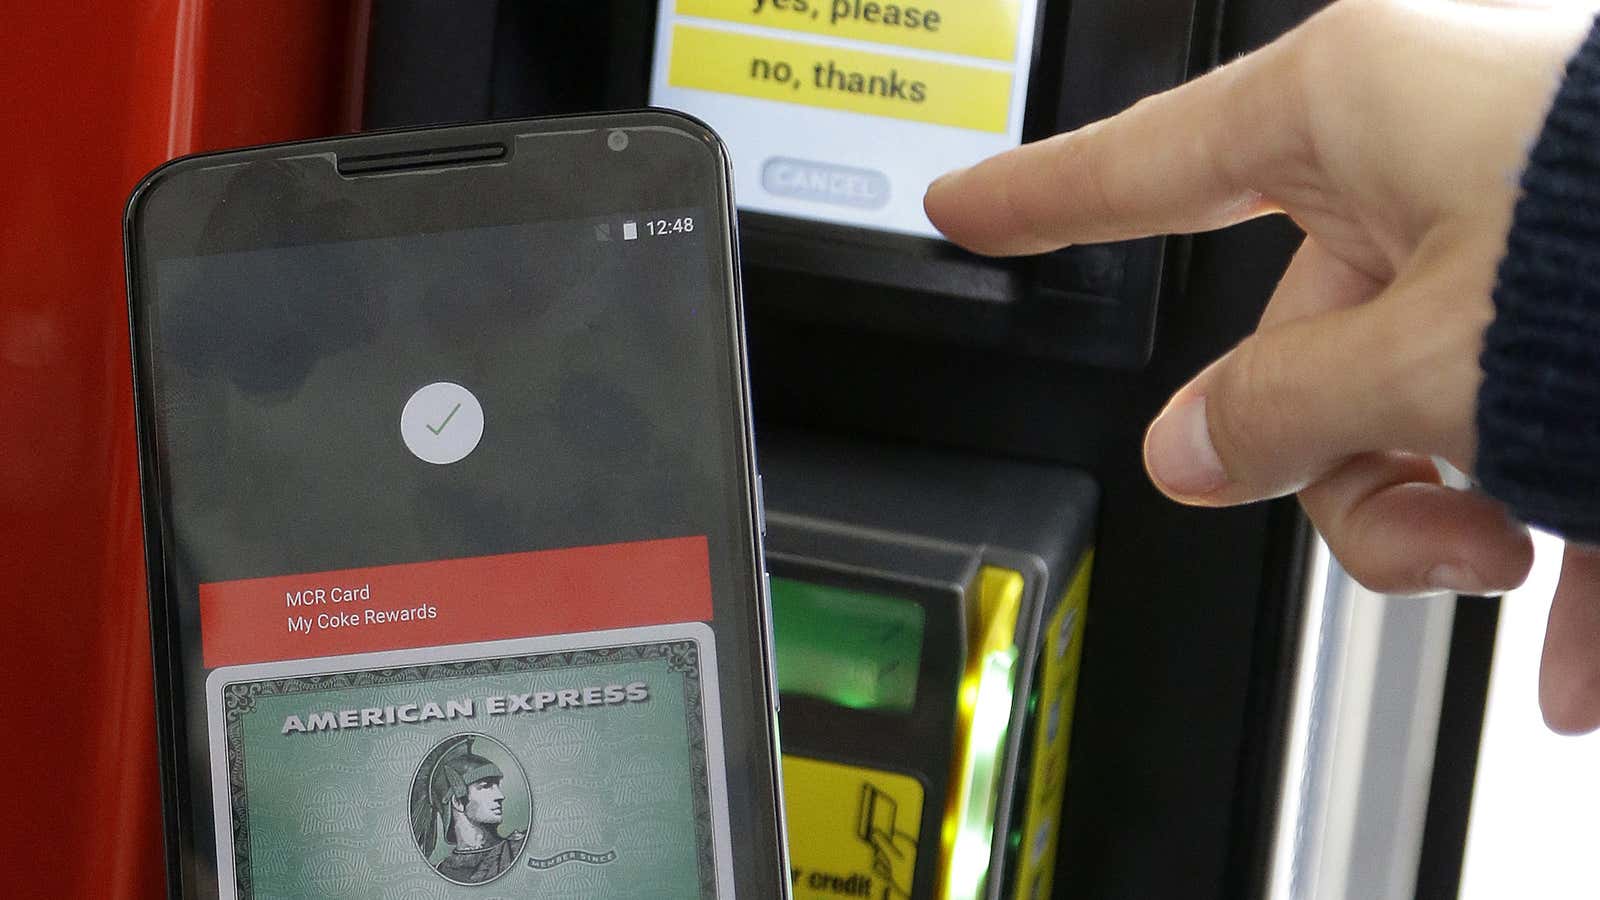 Mobile wallets like Android Pay won’t be a hit with consumers this holiday seasons, a Bankrate.com survey says.